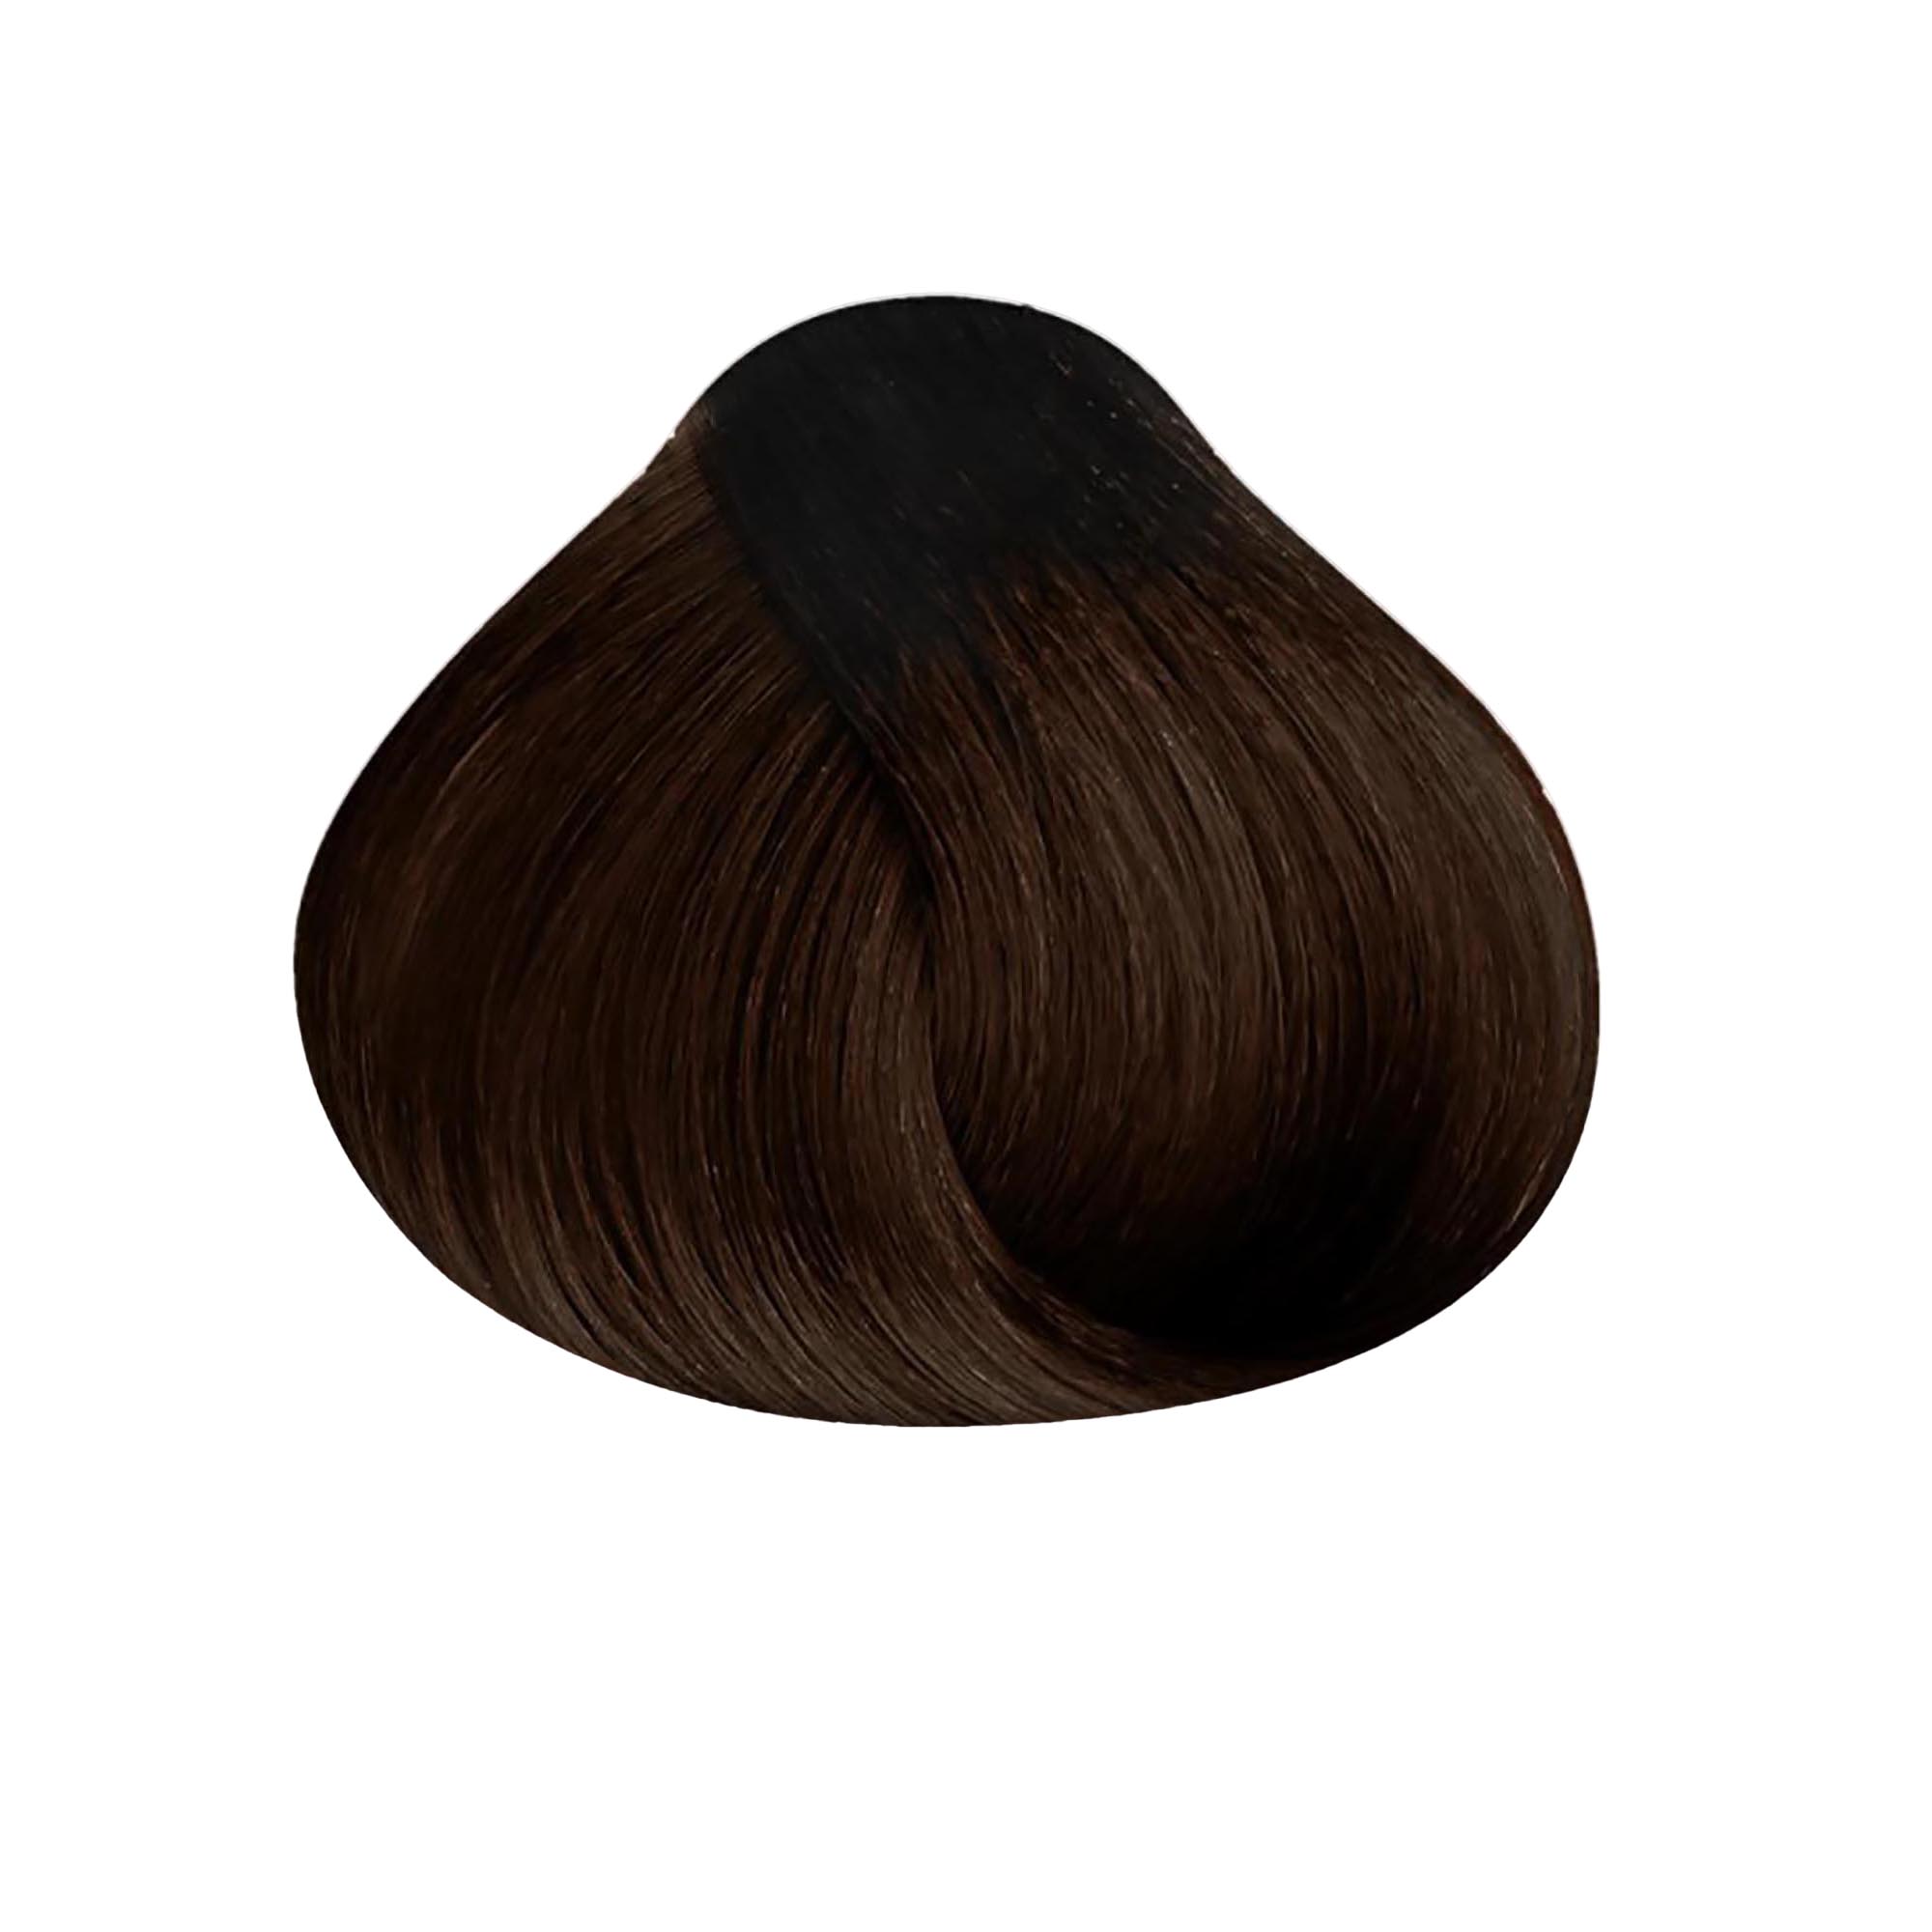 Satin Professional Hair Color / 5N Light Brown / Swatch